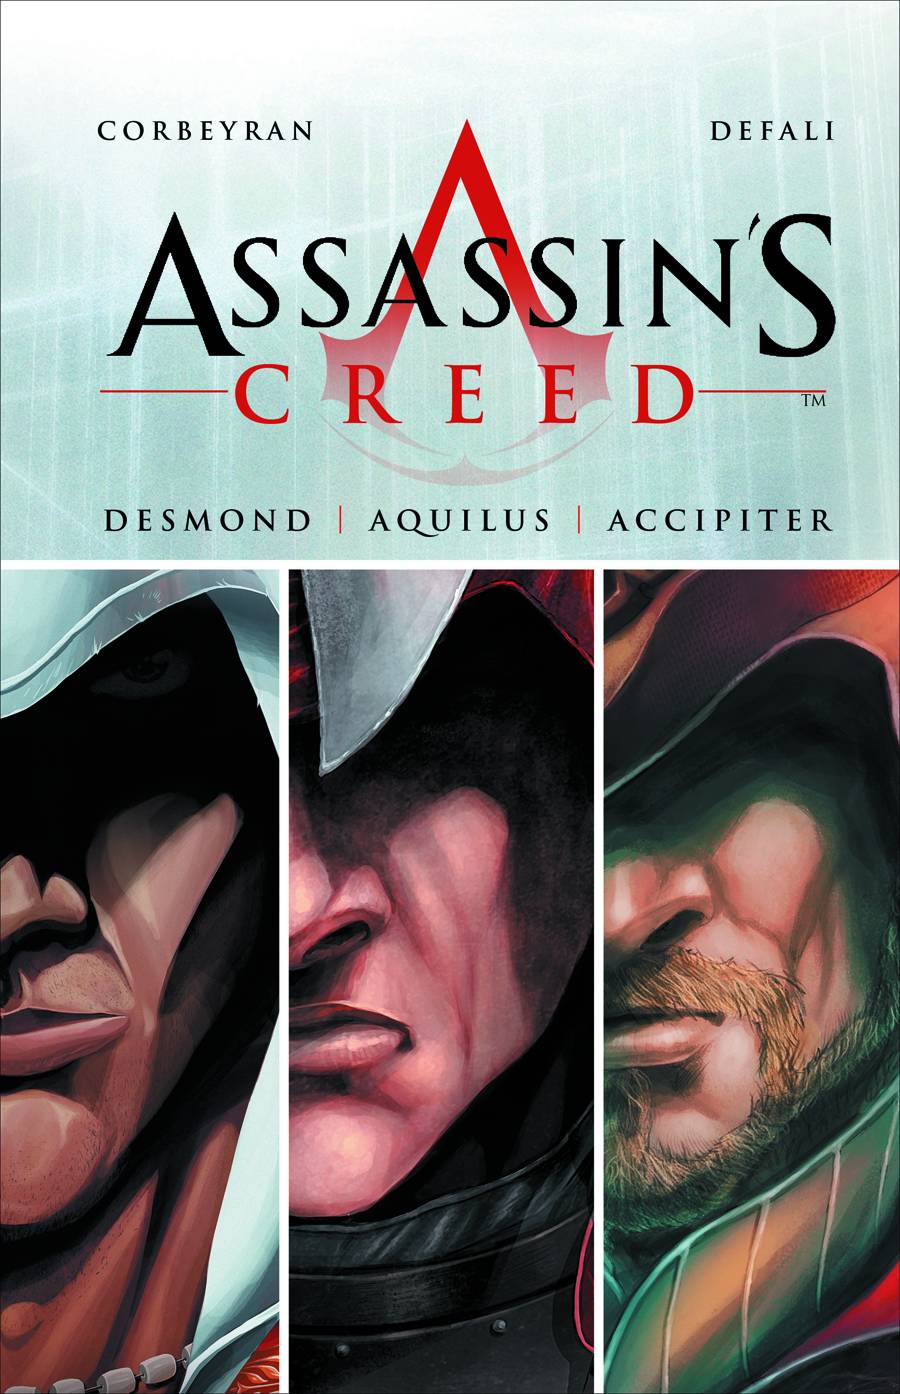 Assassins Creed Ankh of Isis Trilogy Hardcover